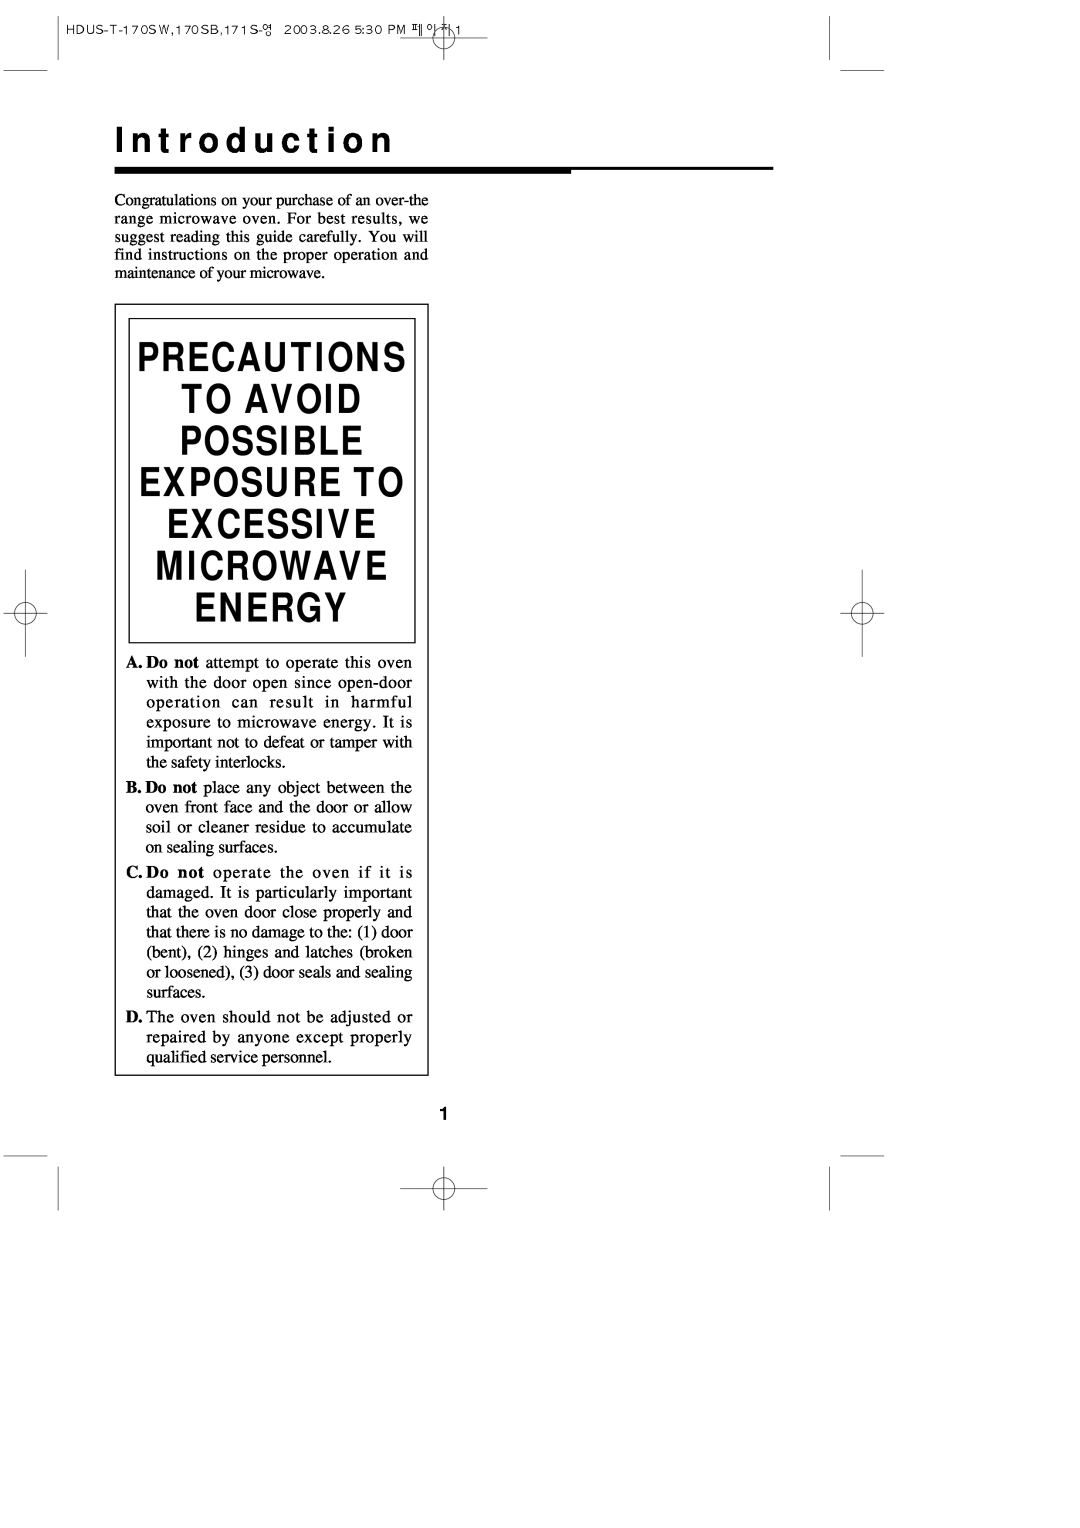 Daewoo KOT-172S, KOT-170SW Precautions To Avoid Possible Exposure To, Excessive Microwave Energy, I n t r o d u c t i o n 